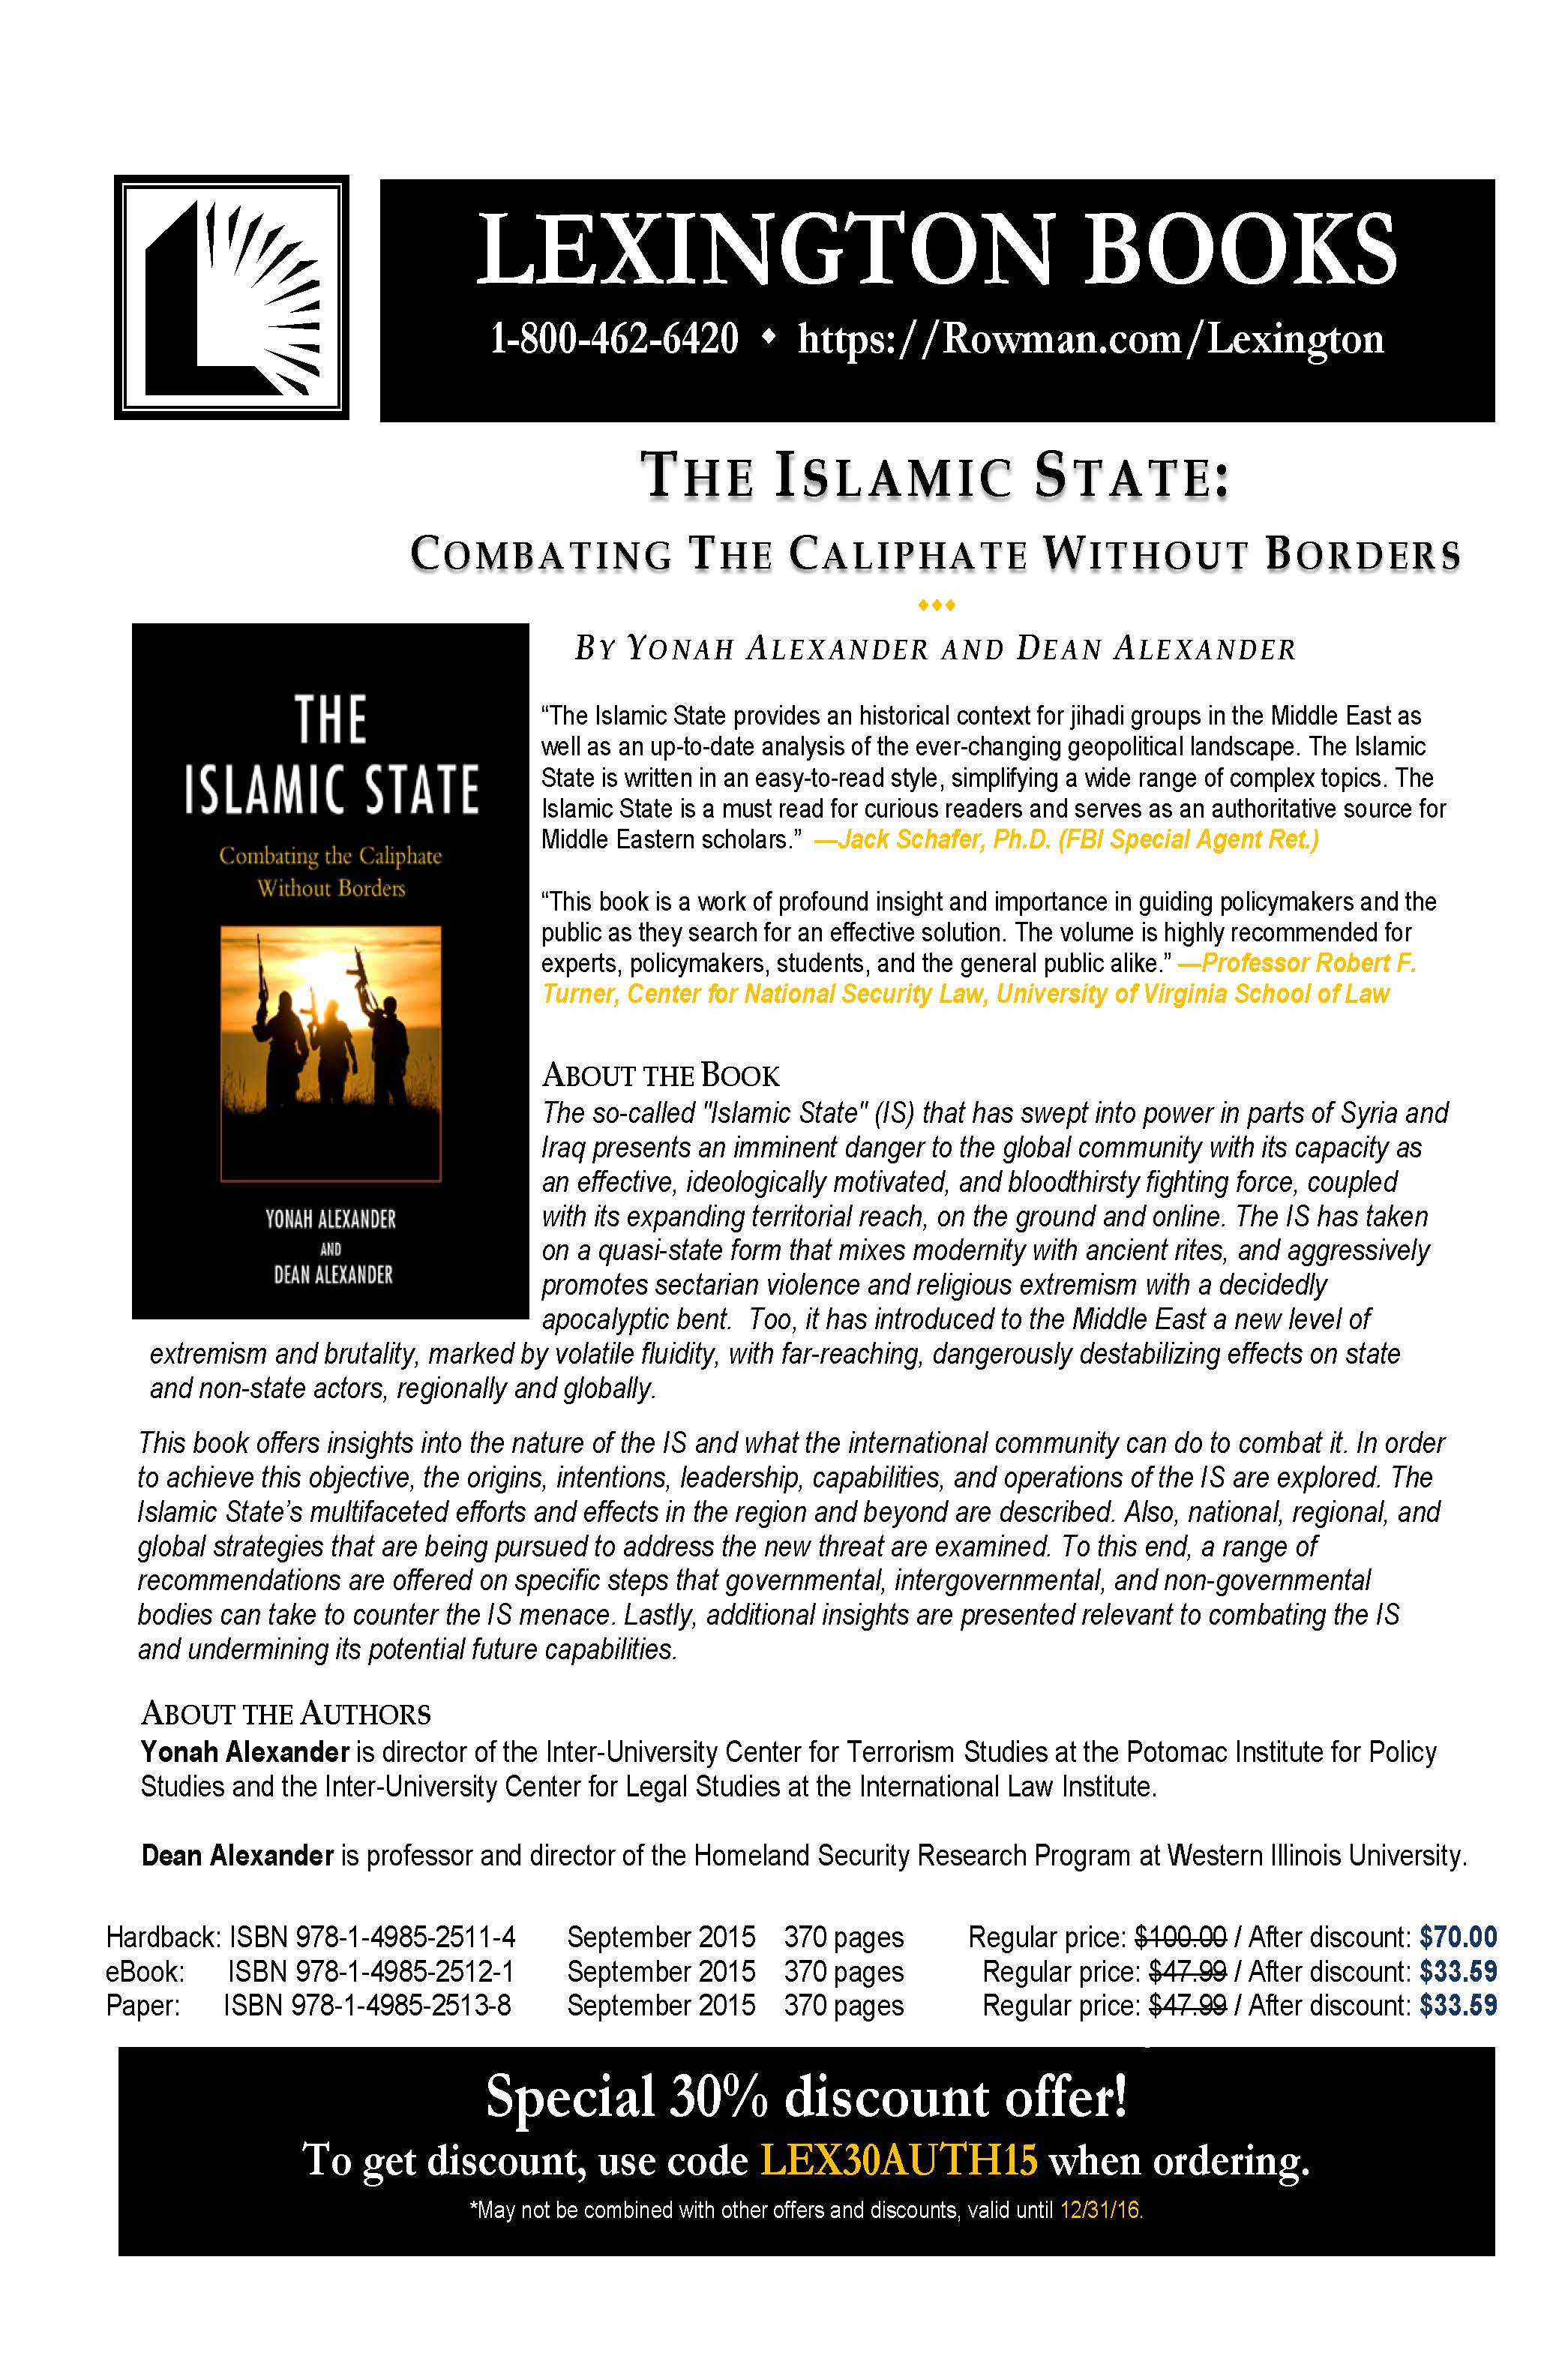 IslamicStateFlyer Page 1